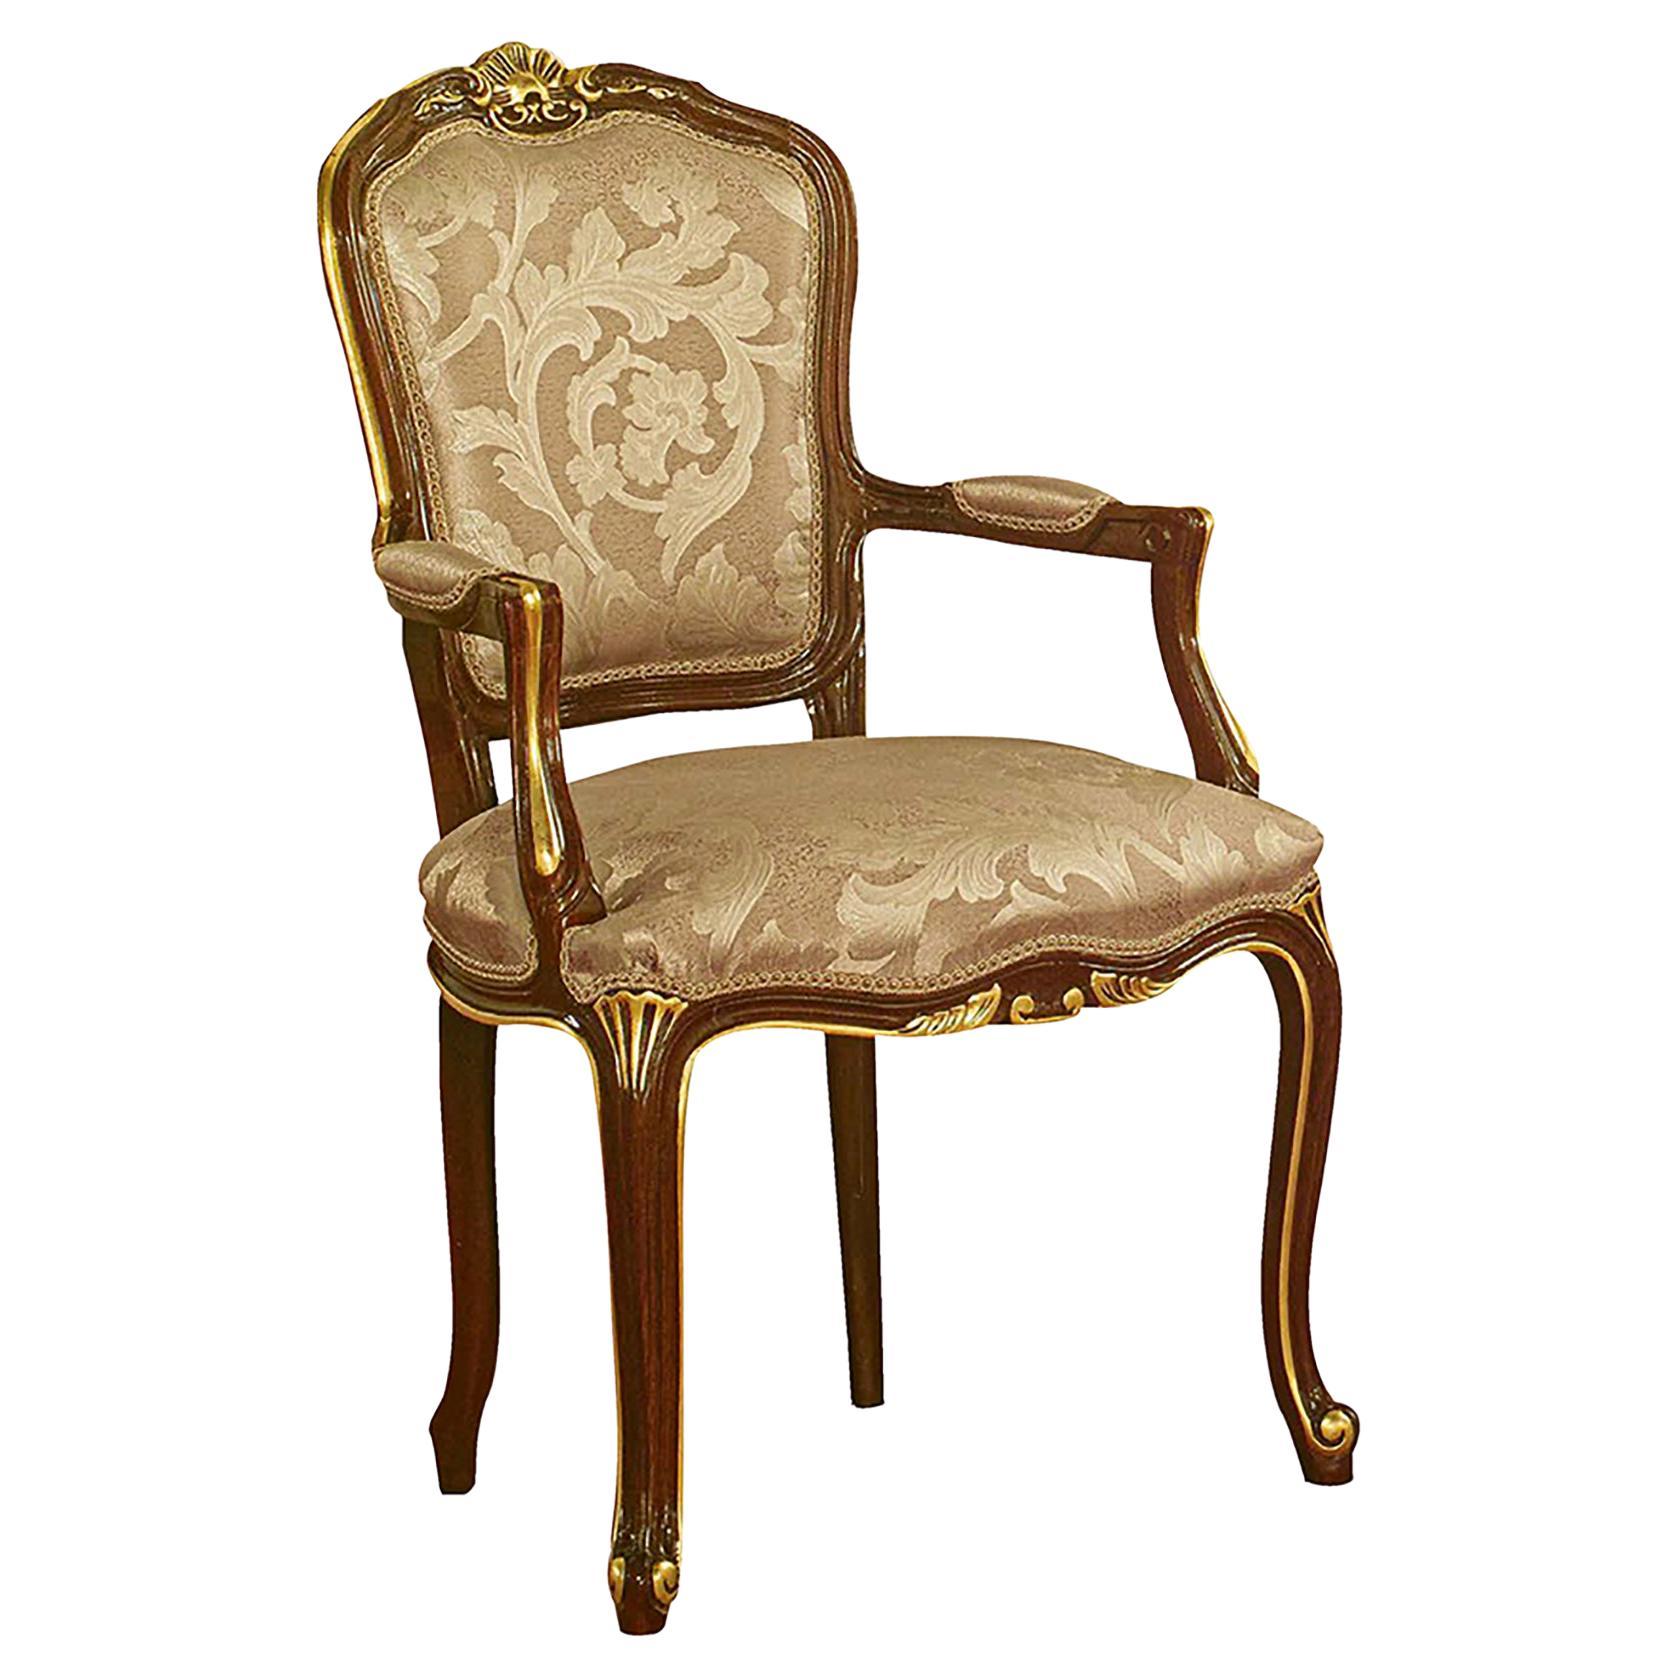 Baroque Chair with Armrest in Natural Wood Walnut and Gold Leaf Finish